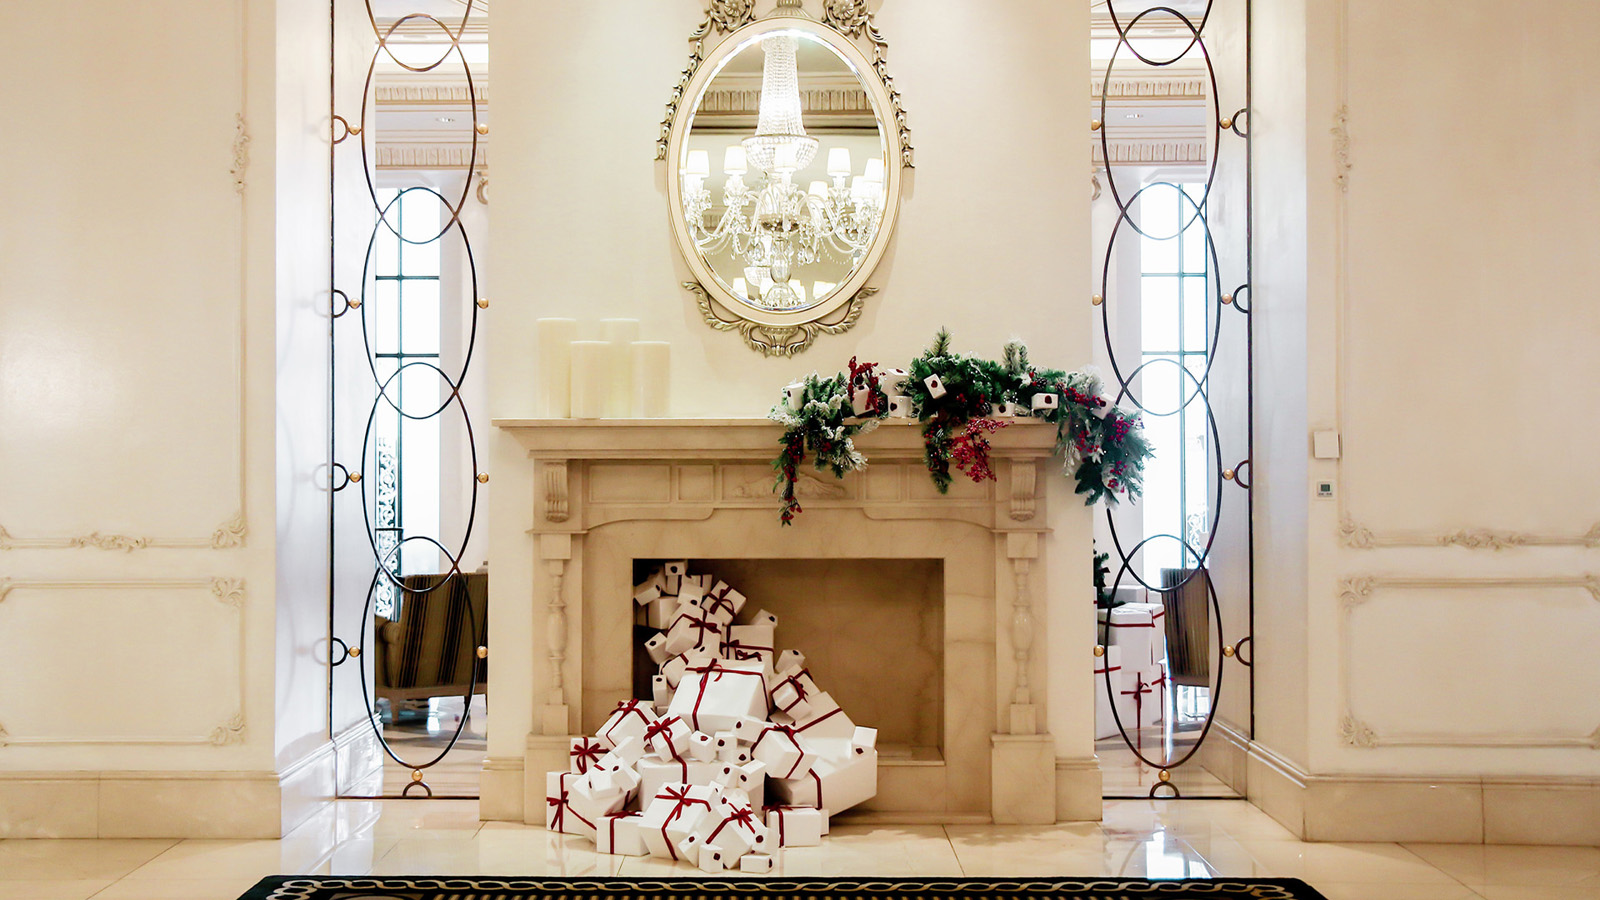 A fireplace with wrapped presents coming out of the fireplace